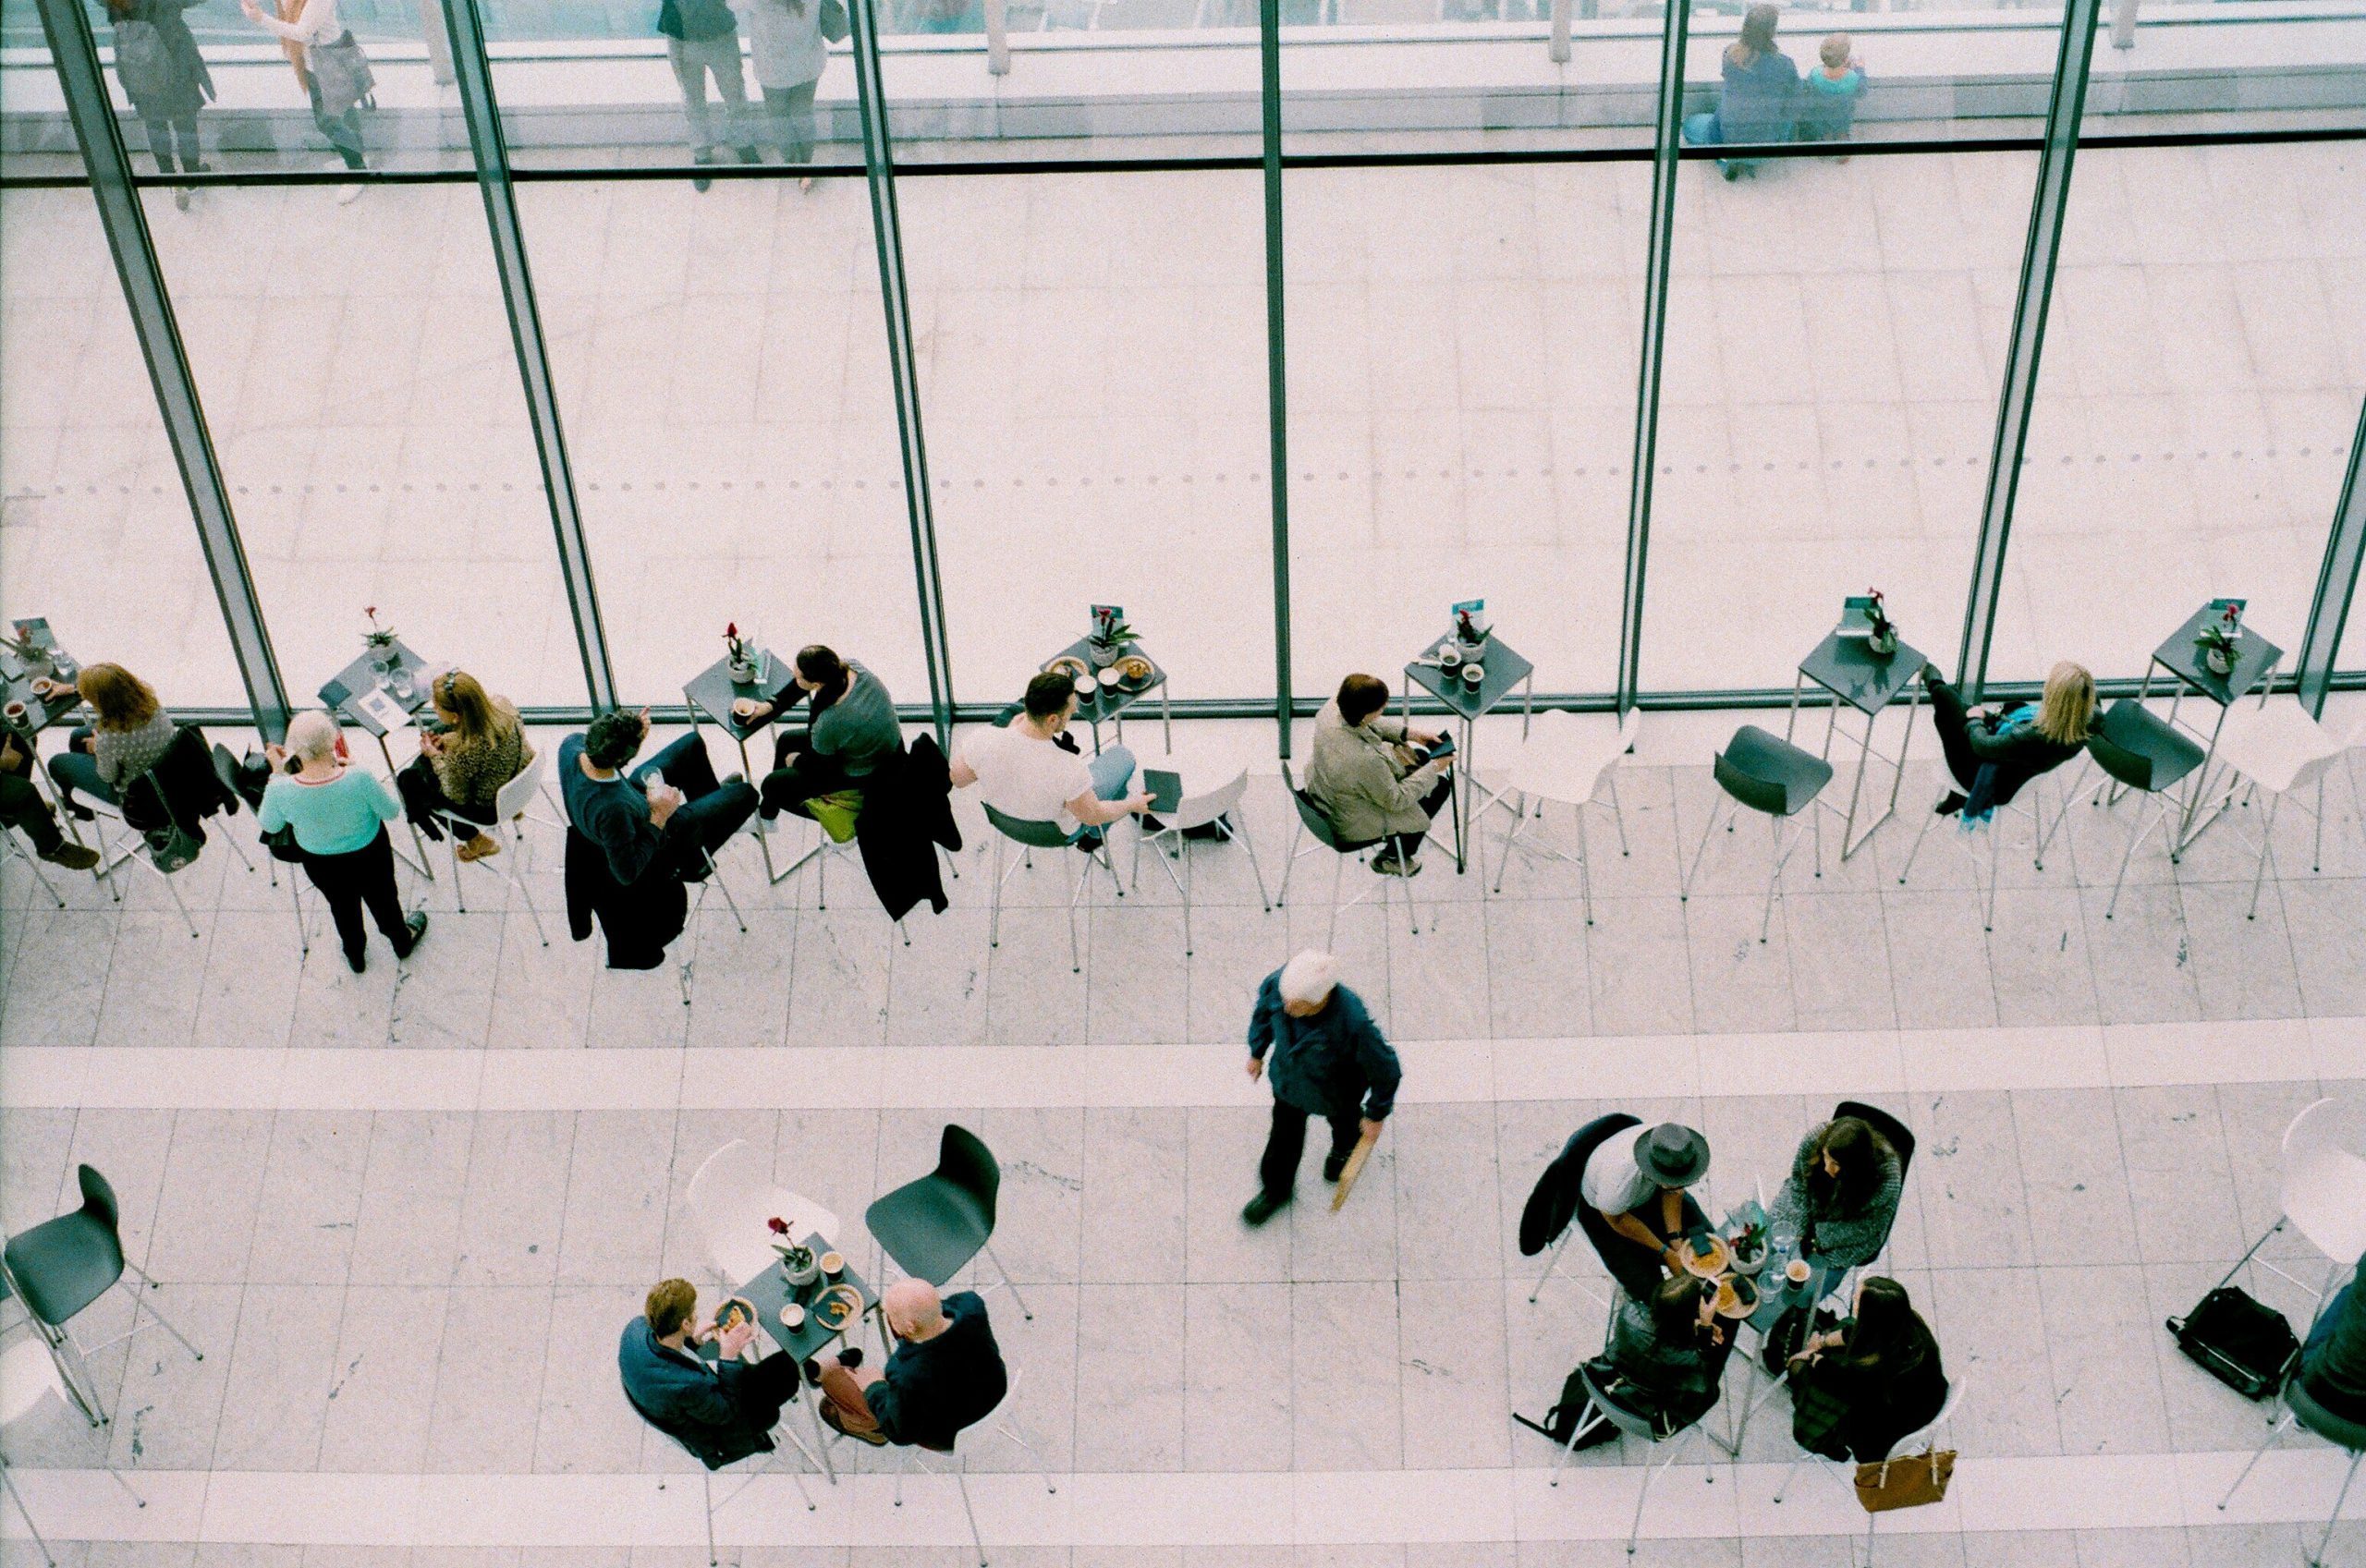 aerial view of people working in an office lobby